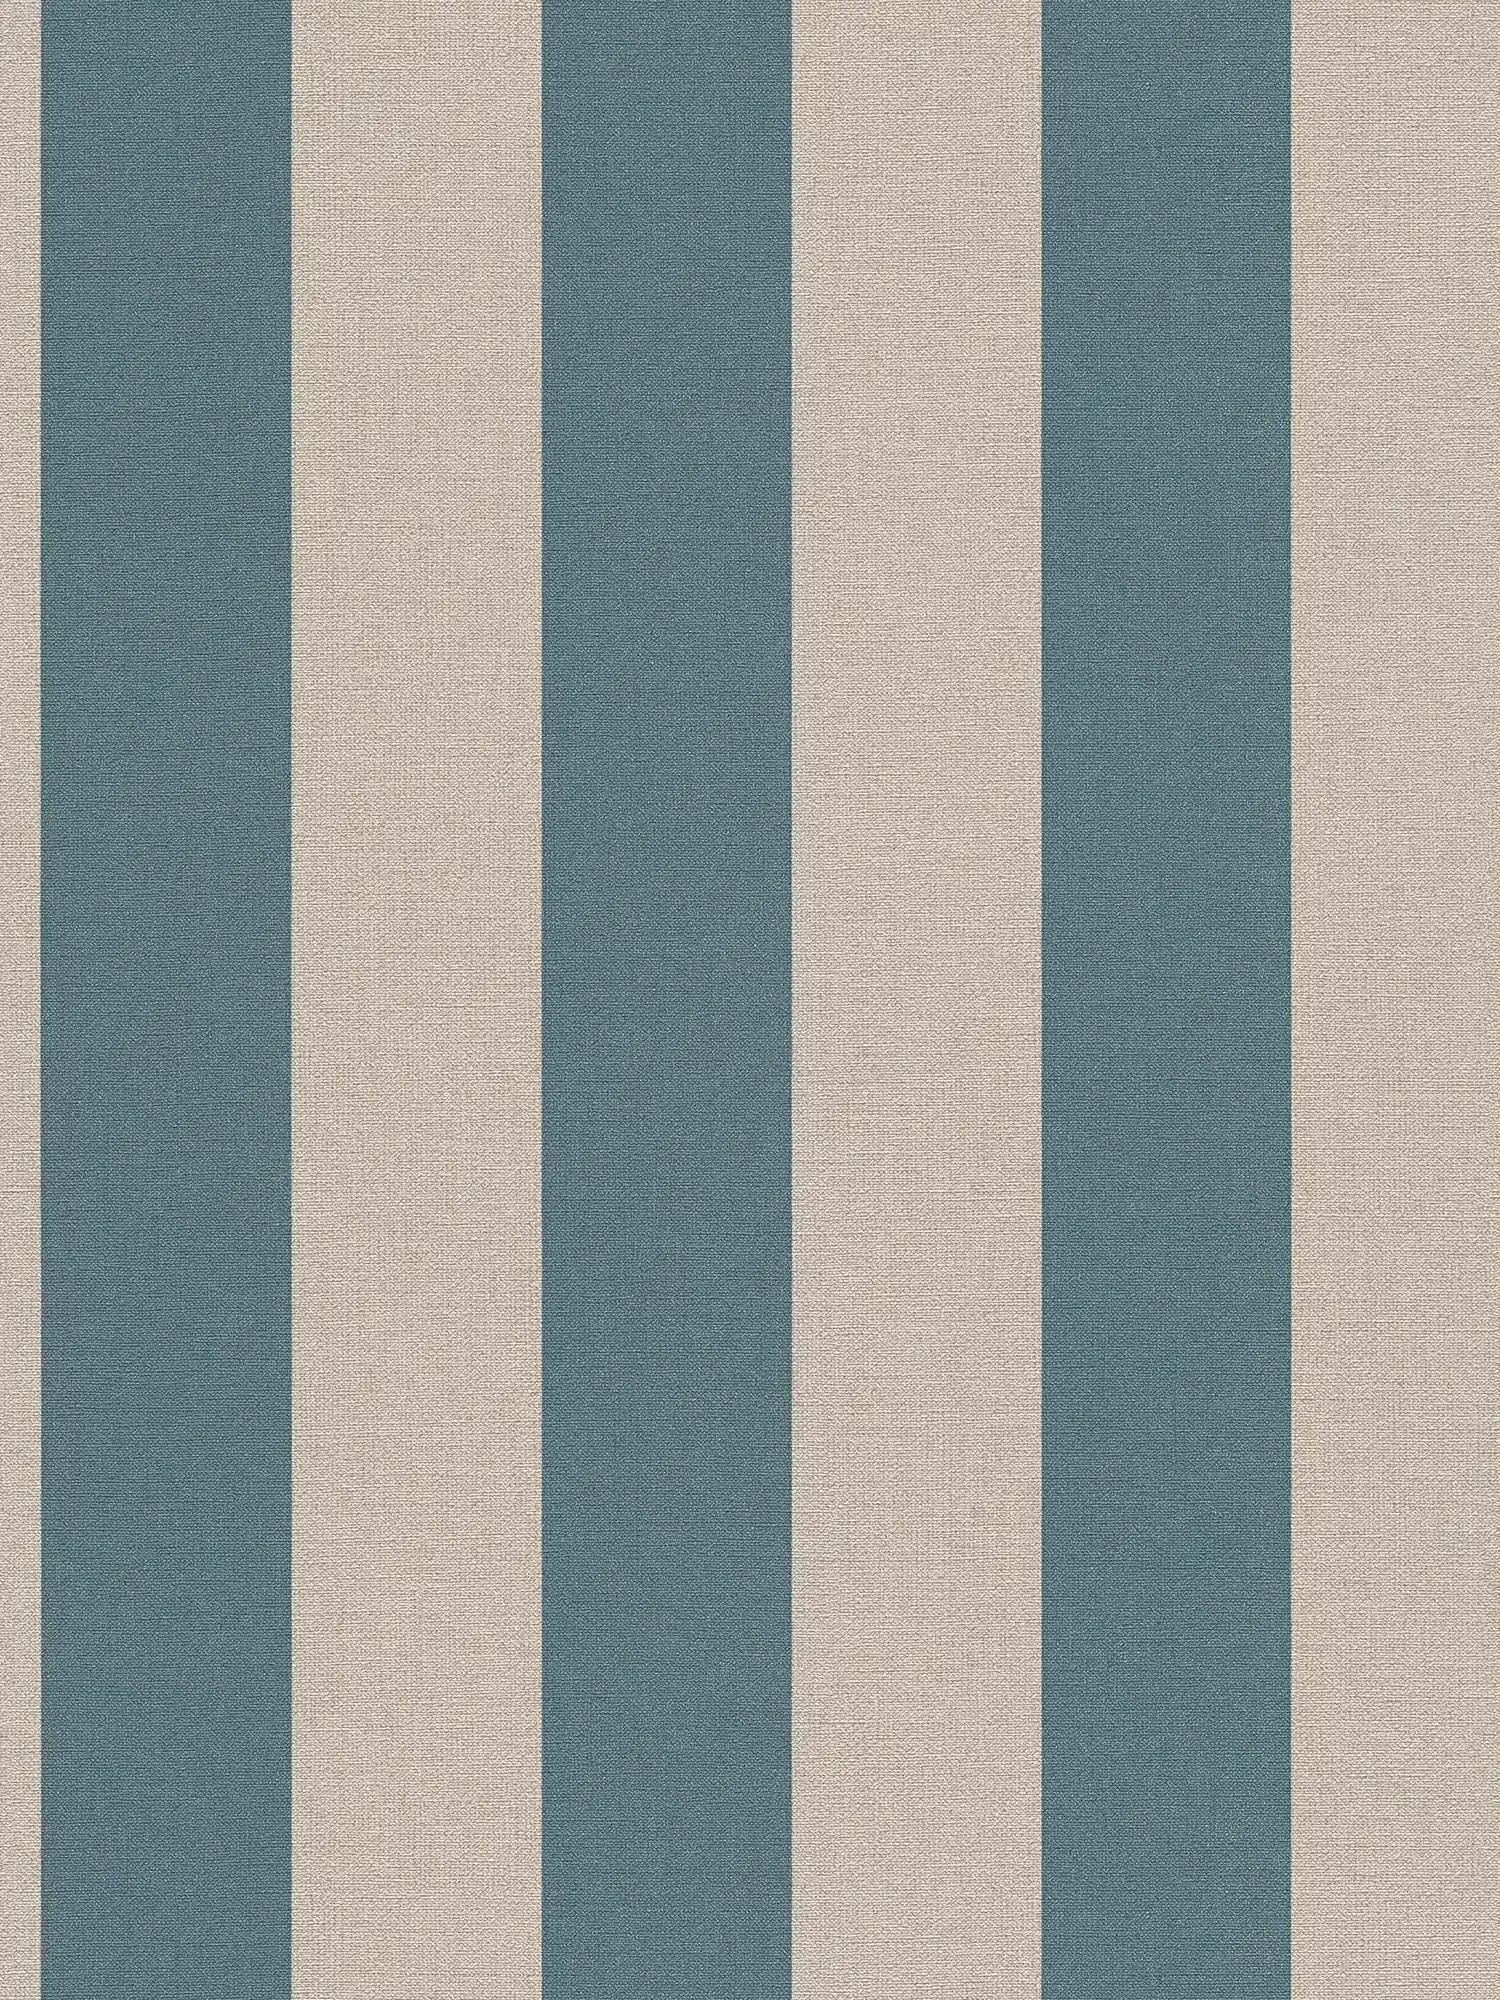 Striped wallpaper with linen look PVC-free - blue, brown
